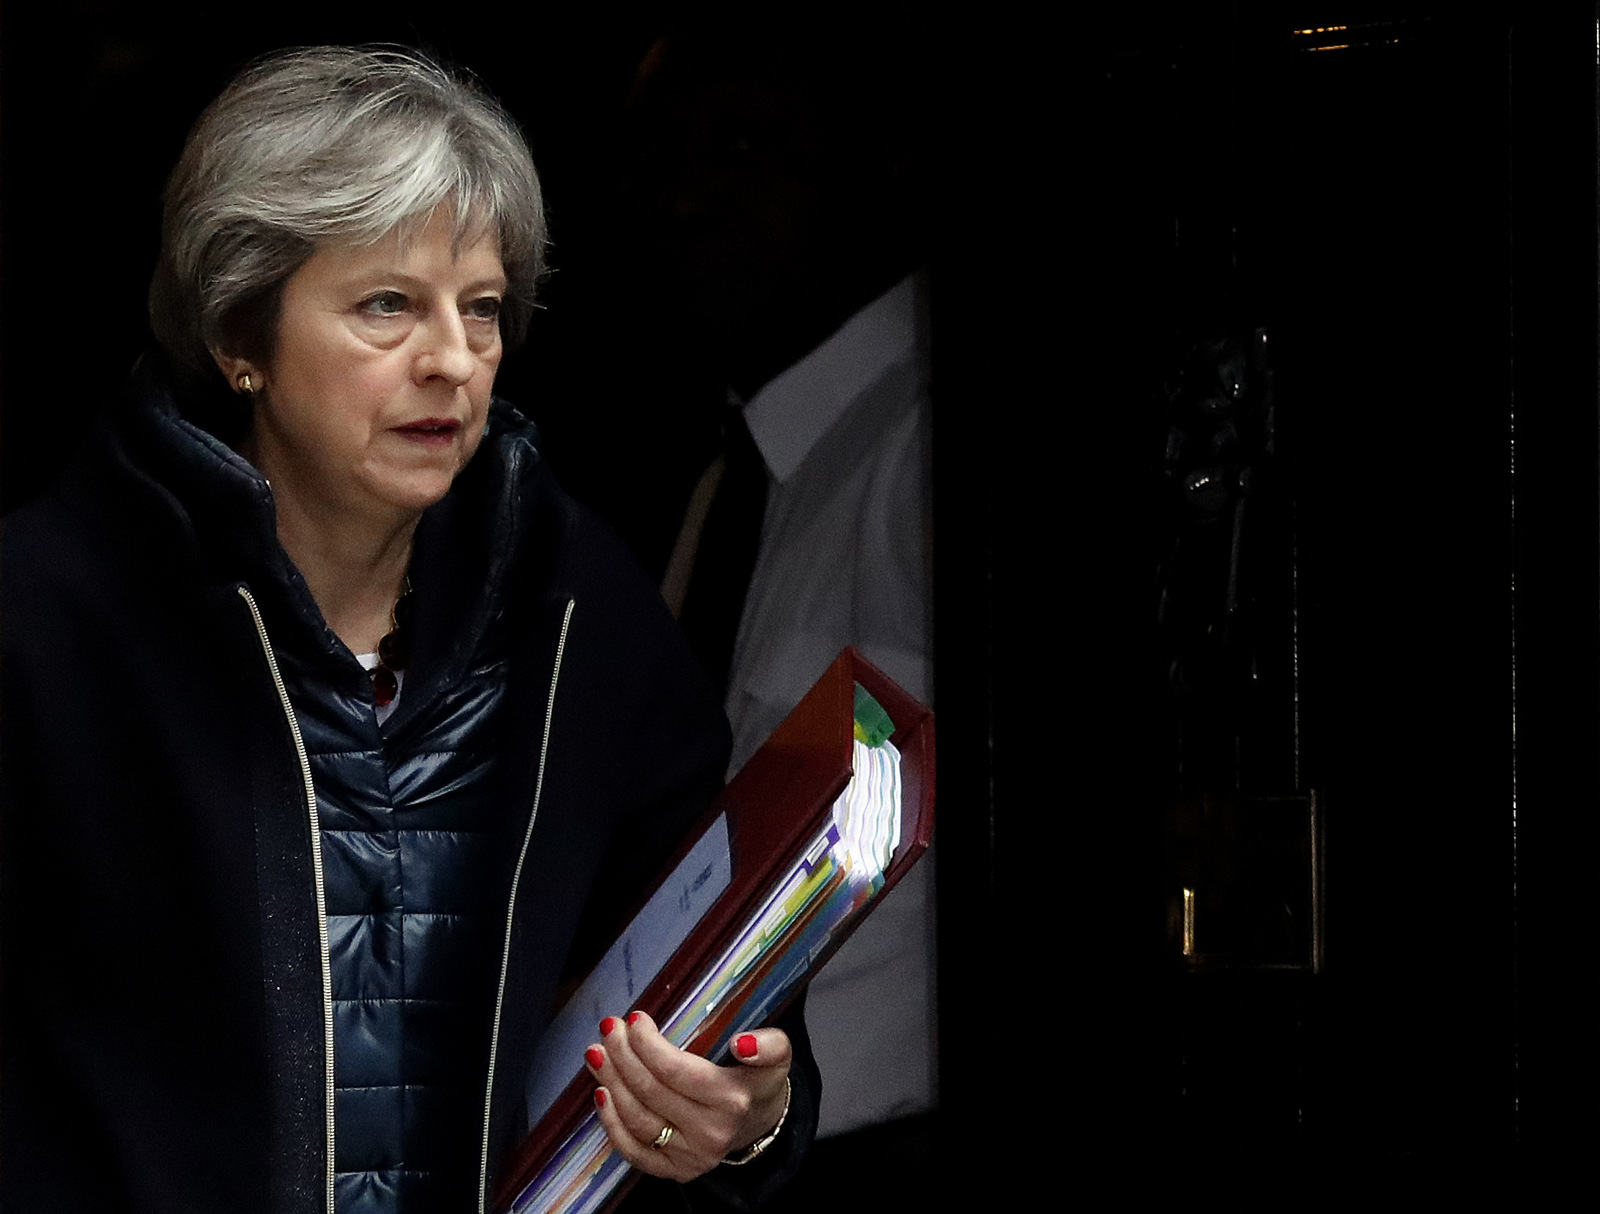 Britain's Prime Minister Theresa May leaves 10 Downing Street to attend the weekly Prime Minister's Questions session, in parliament in London, March 14, 2018. The Kremlin says Russia rejects the deadline that Britain gave it to explain any involvement in the poisoning of an ex-Russian spy. (AP/Frank Augstein)